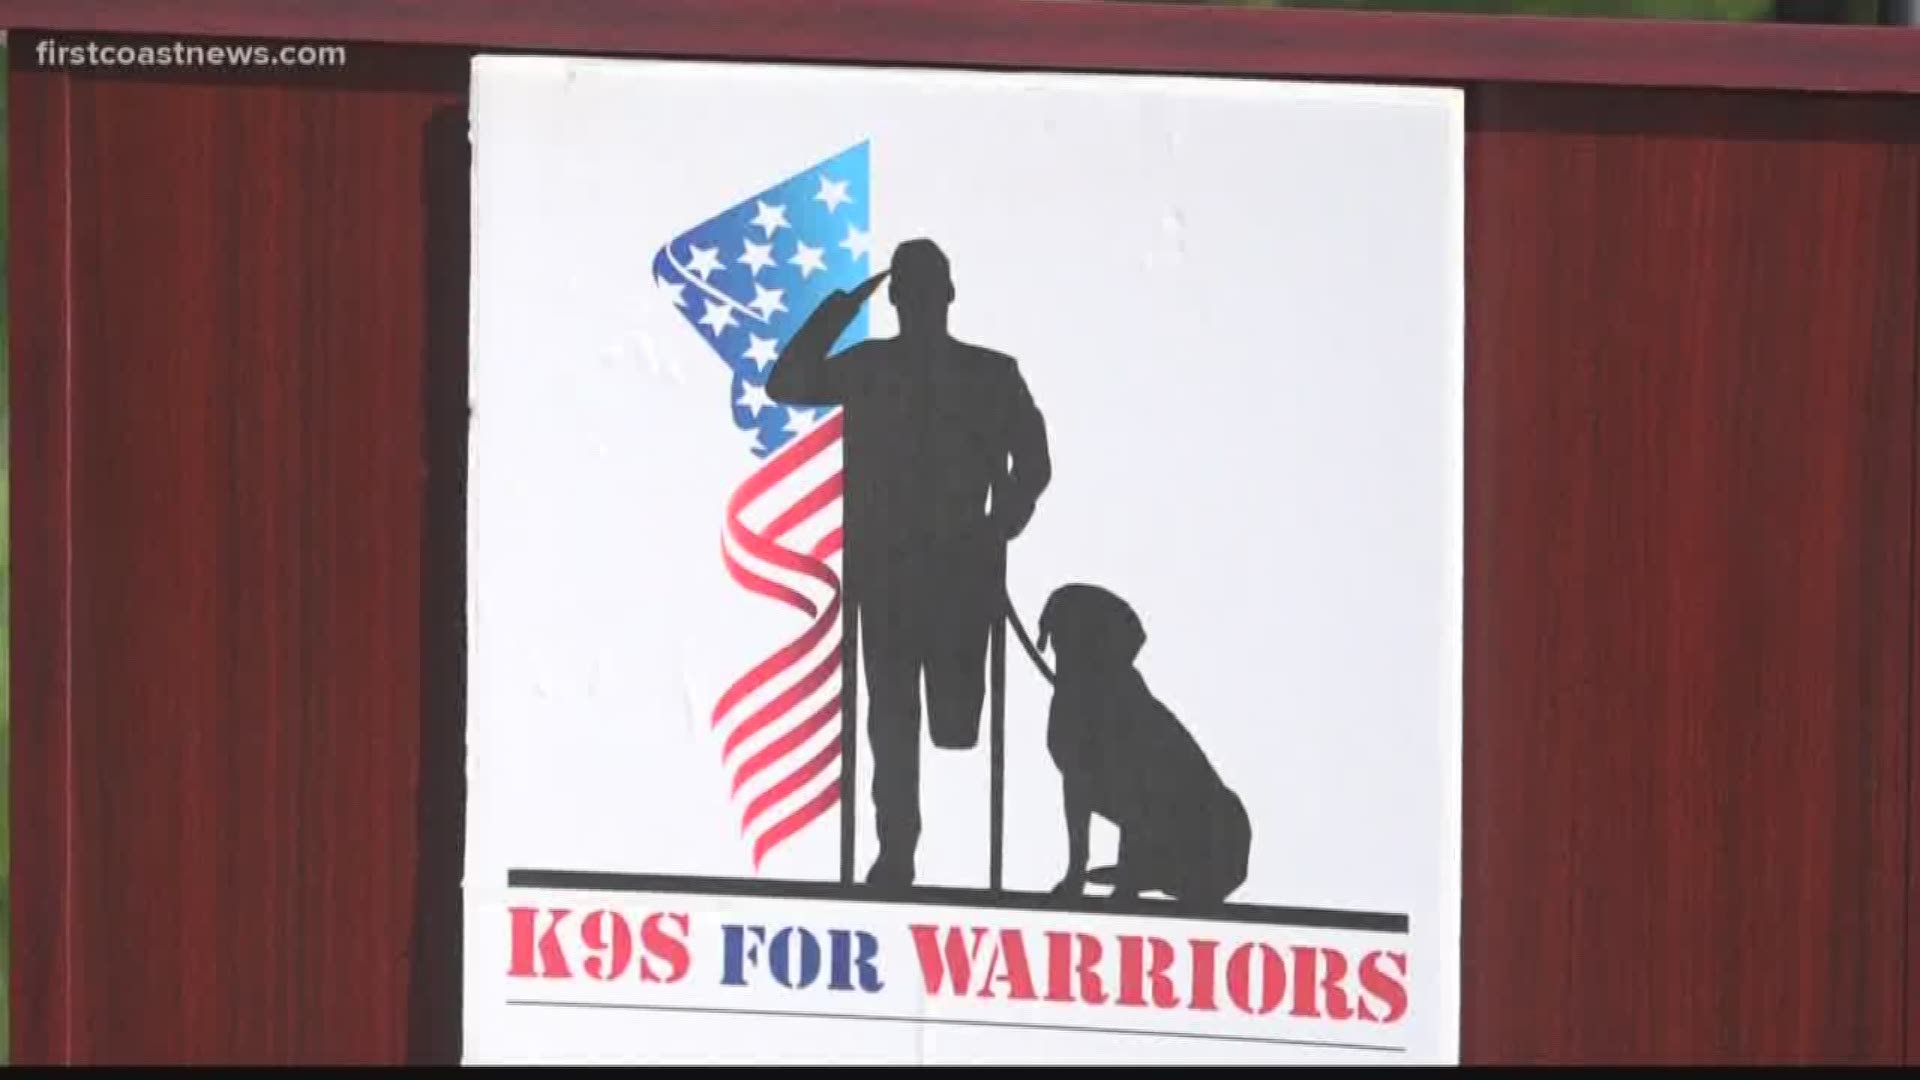 K9s For Warriors is dedicated to providing service canines to veterans suffering from PTSD, traumatic brain injury and/or military sexual trauma.